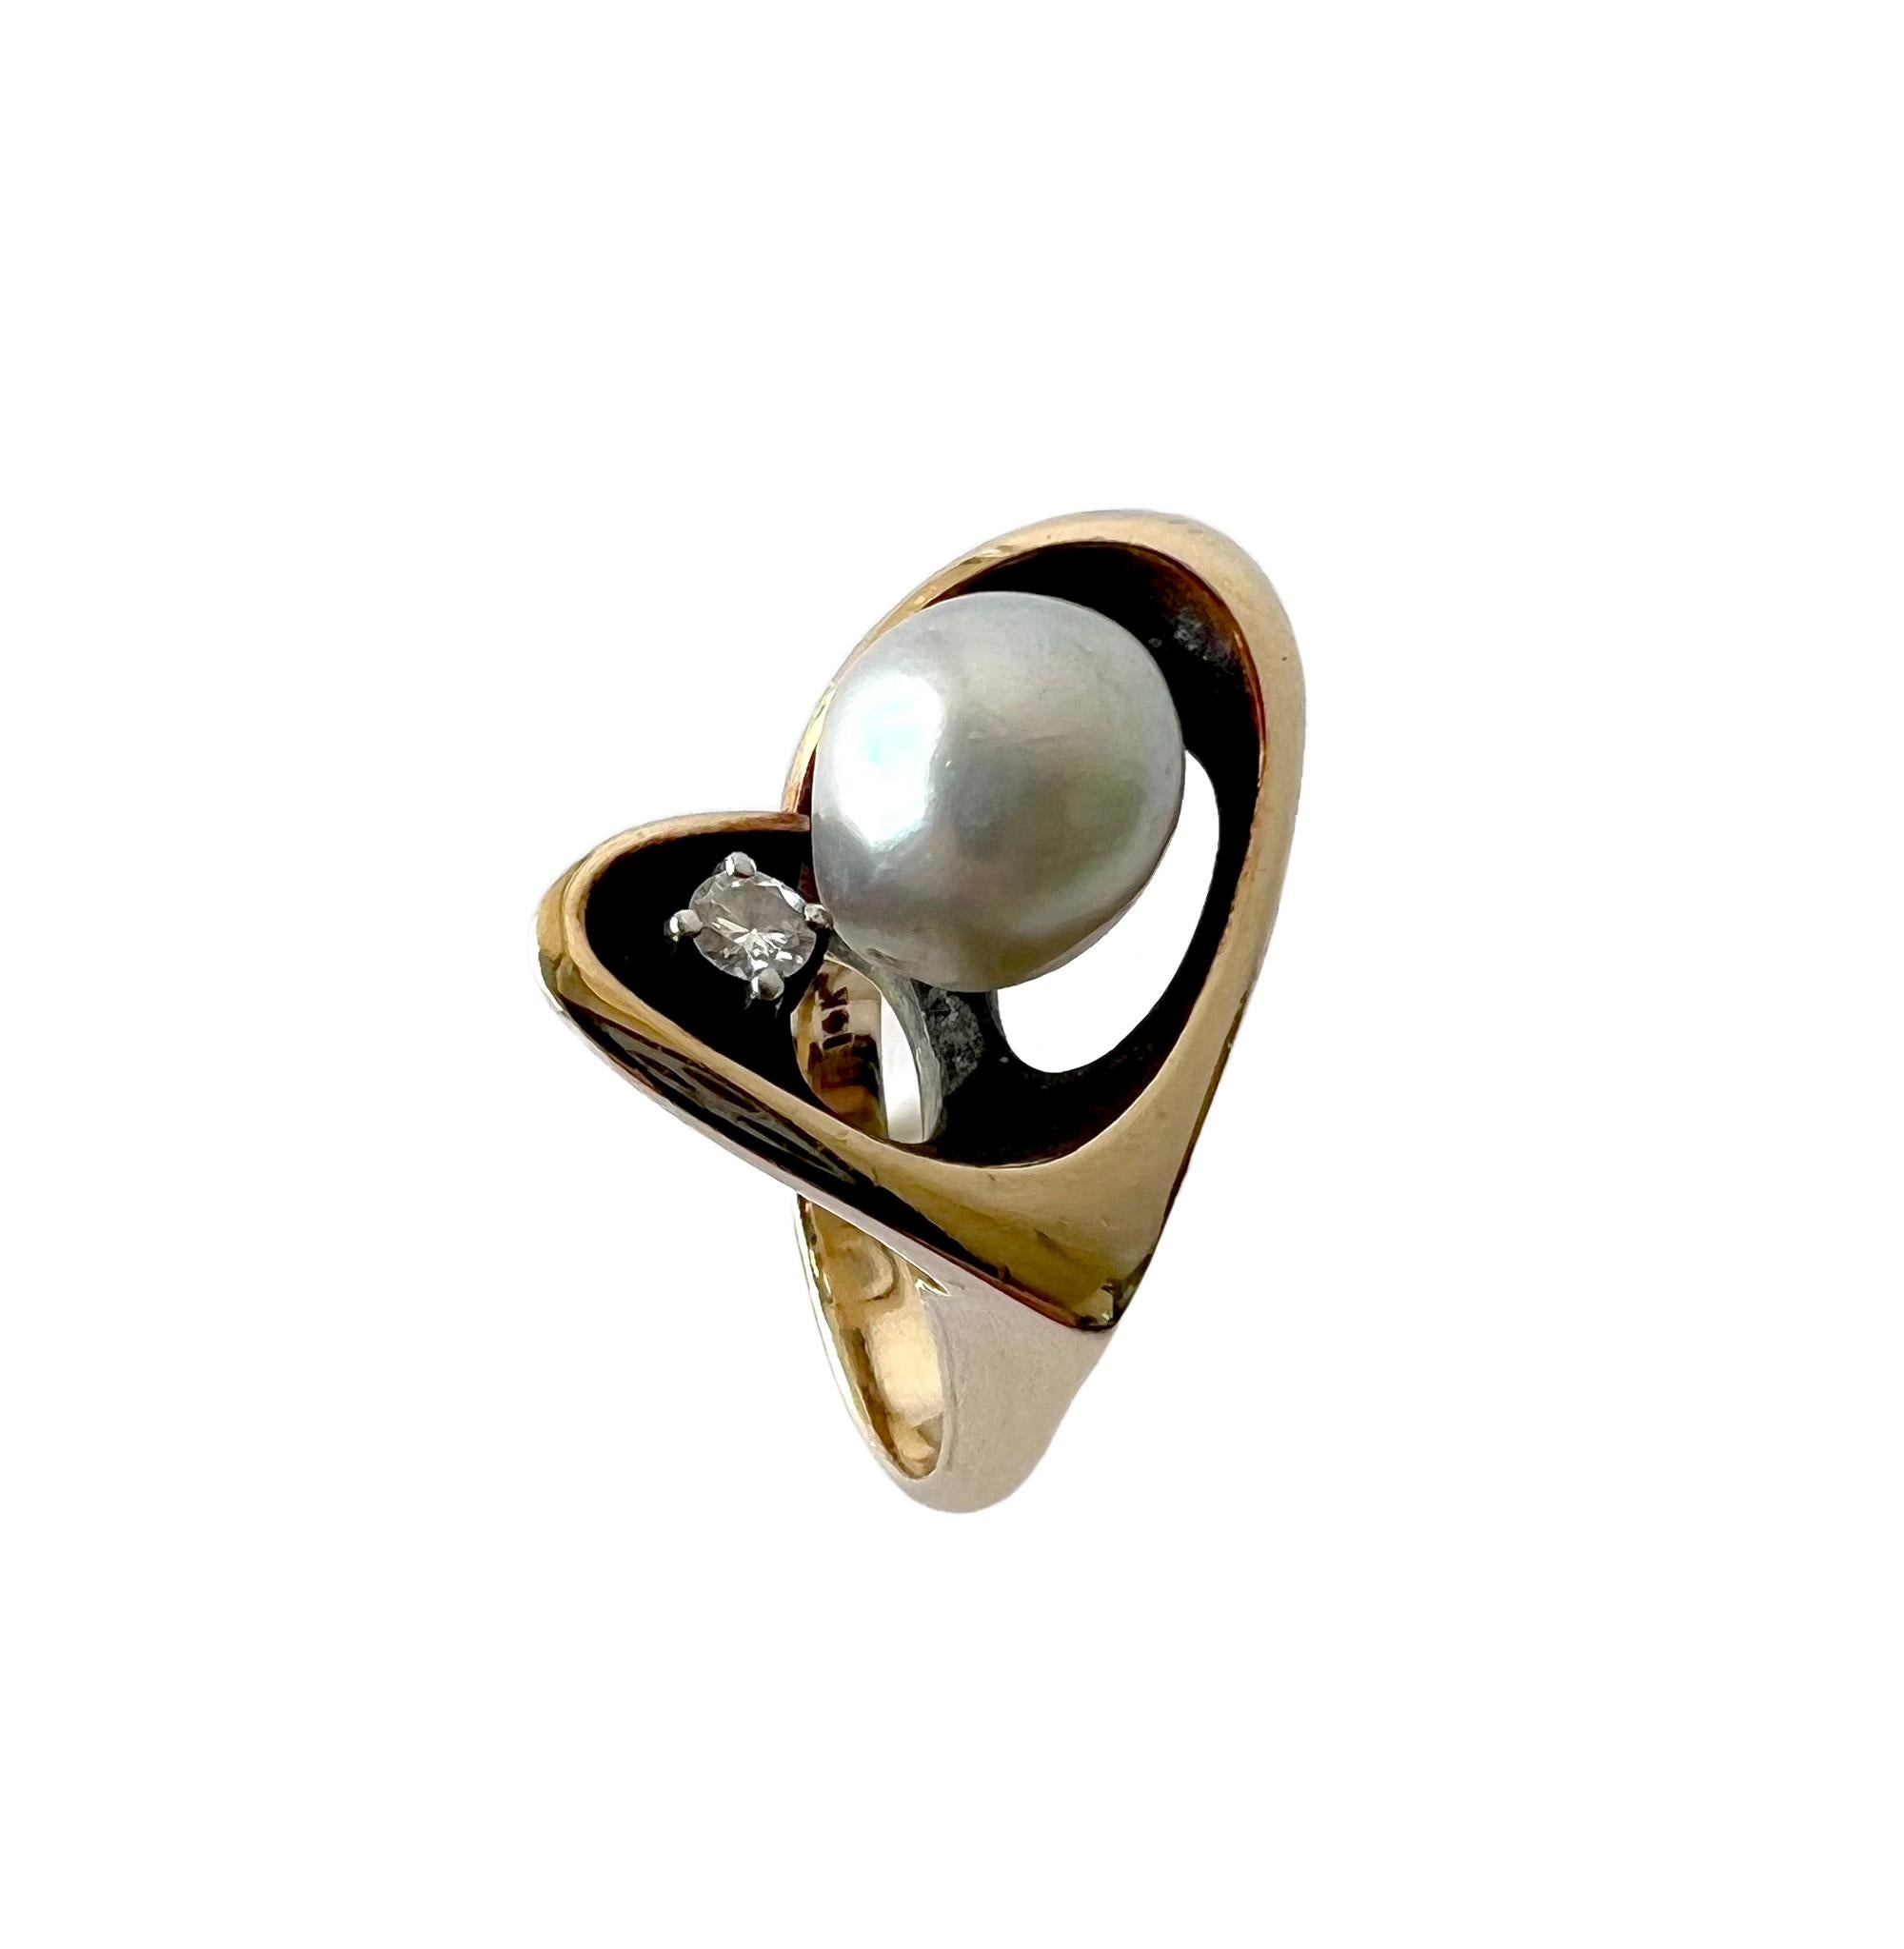 1950's 14K gold ring with baroque pearl and diamond, possibly created by Ed Wiener of New York City, New York.
Ring features a 9.8mm baroque pearl set within an oxidized, 14K gold biomorphic setting and embellished with a prong set round diamond